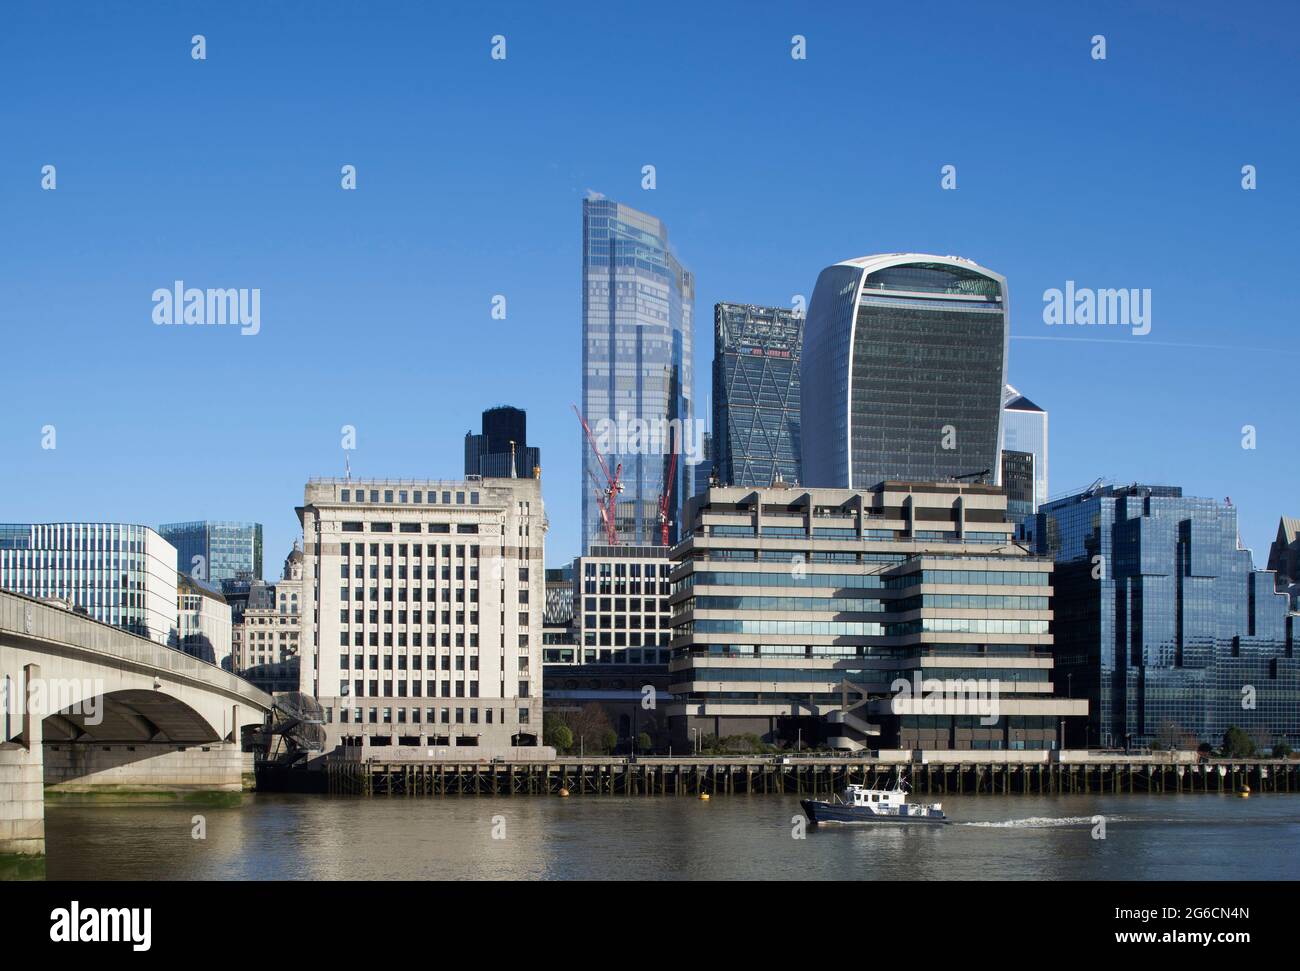 Early morning view over the Thames. 22 Bishopsgate, LONDON, United Kingdom. Architect: PLP Architecture, 2020. Stock Photo